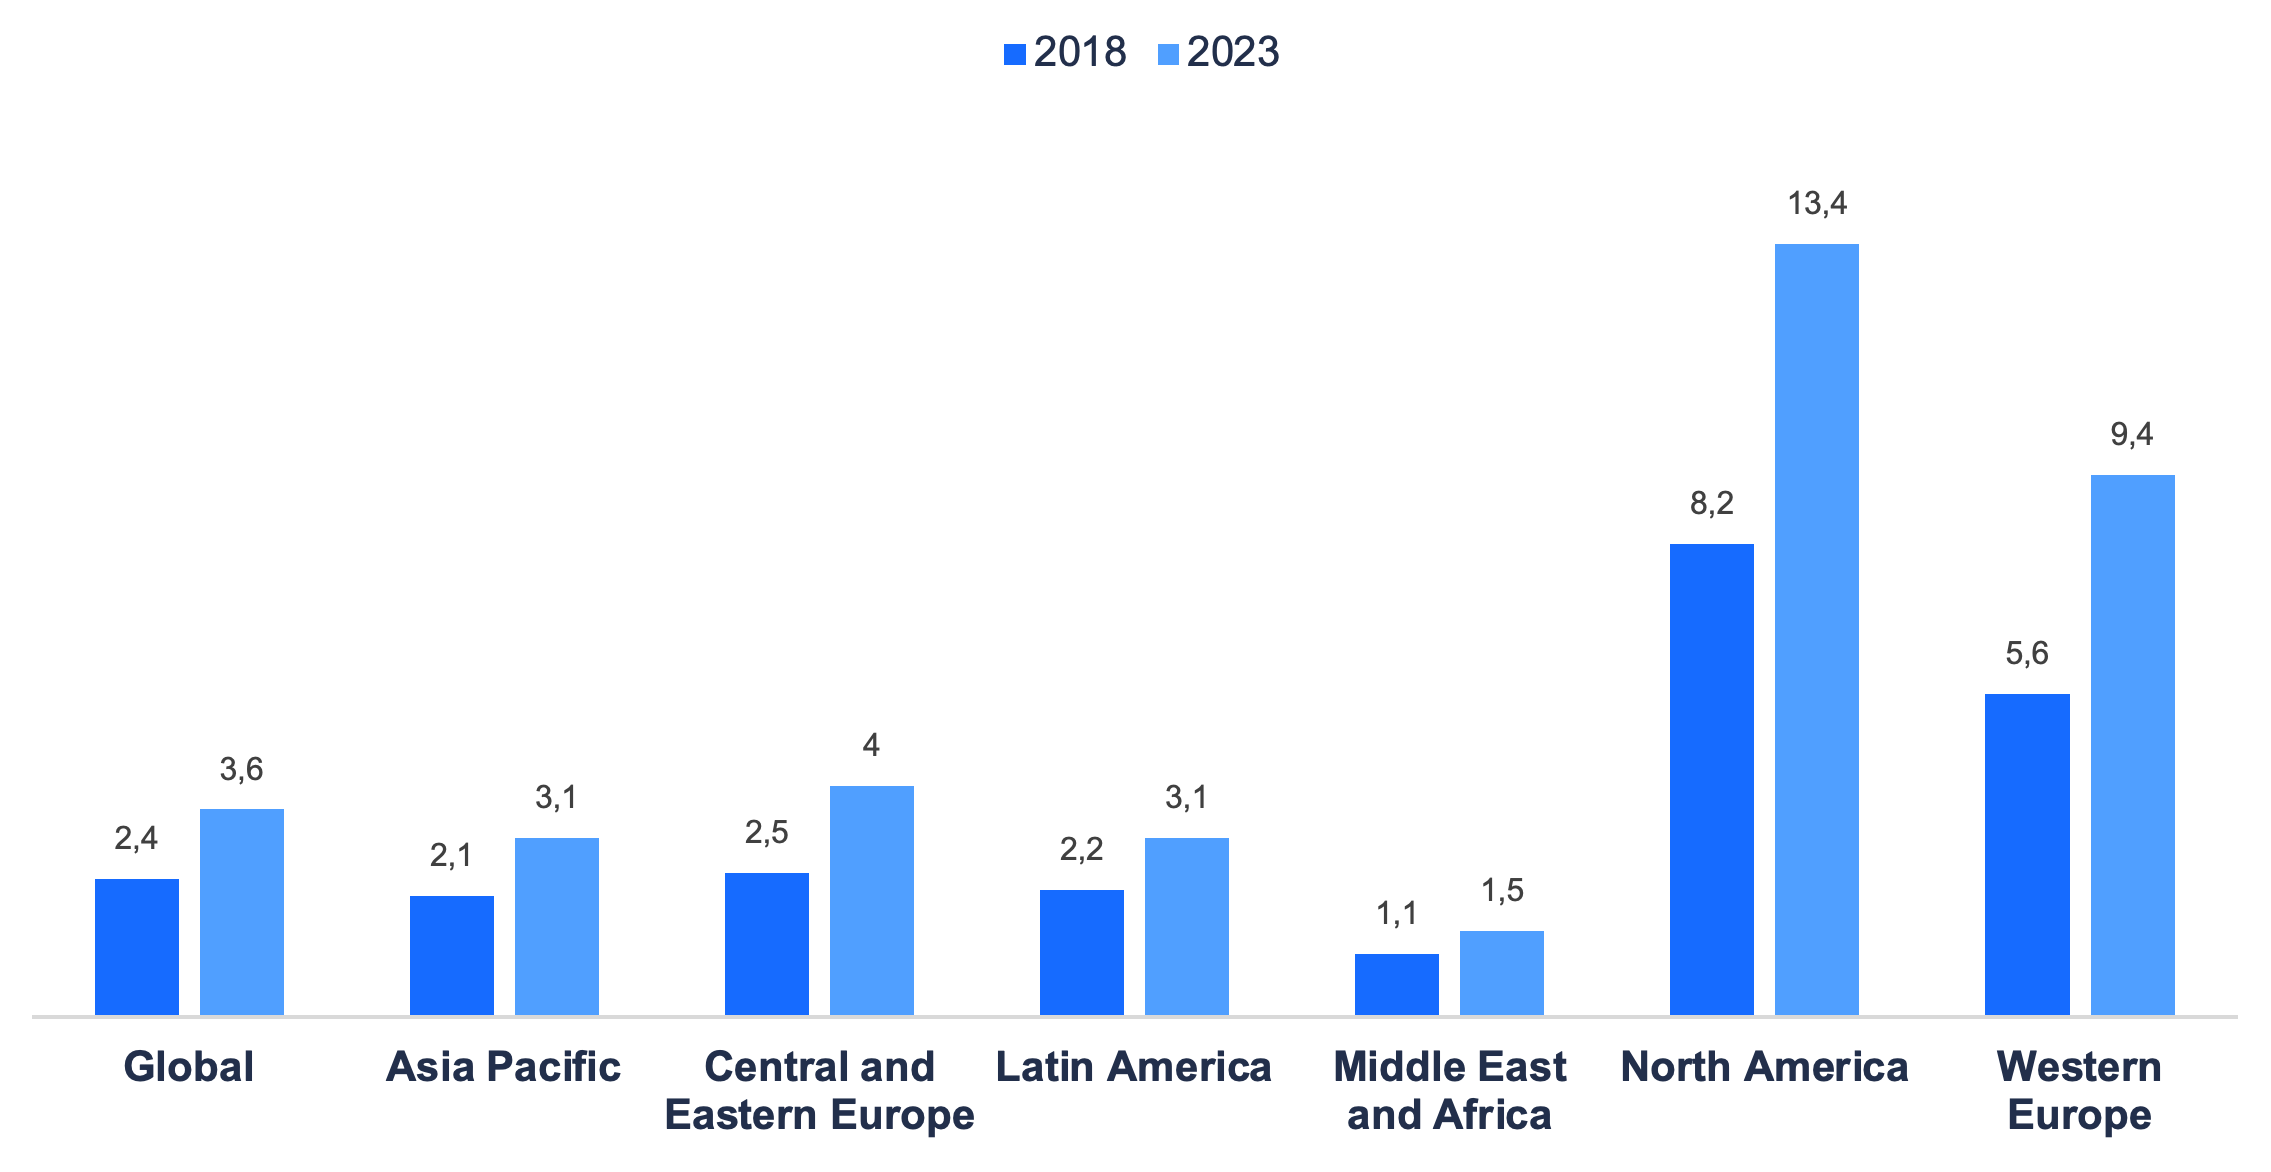 Statista reports that the worldwide average of connected devices per person will reach 3.6 by 2023.